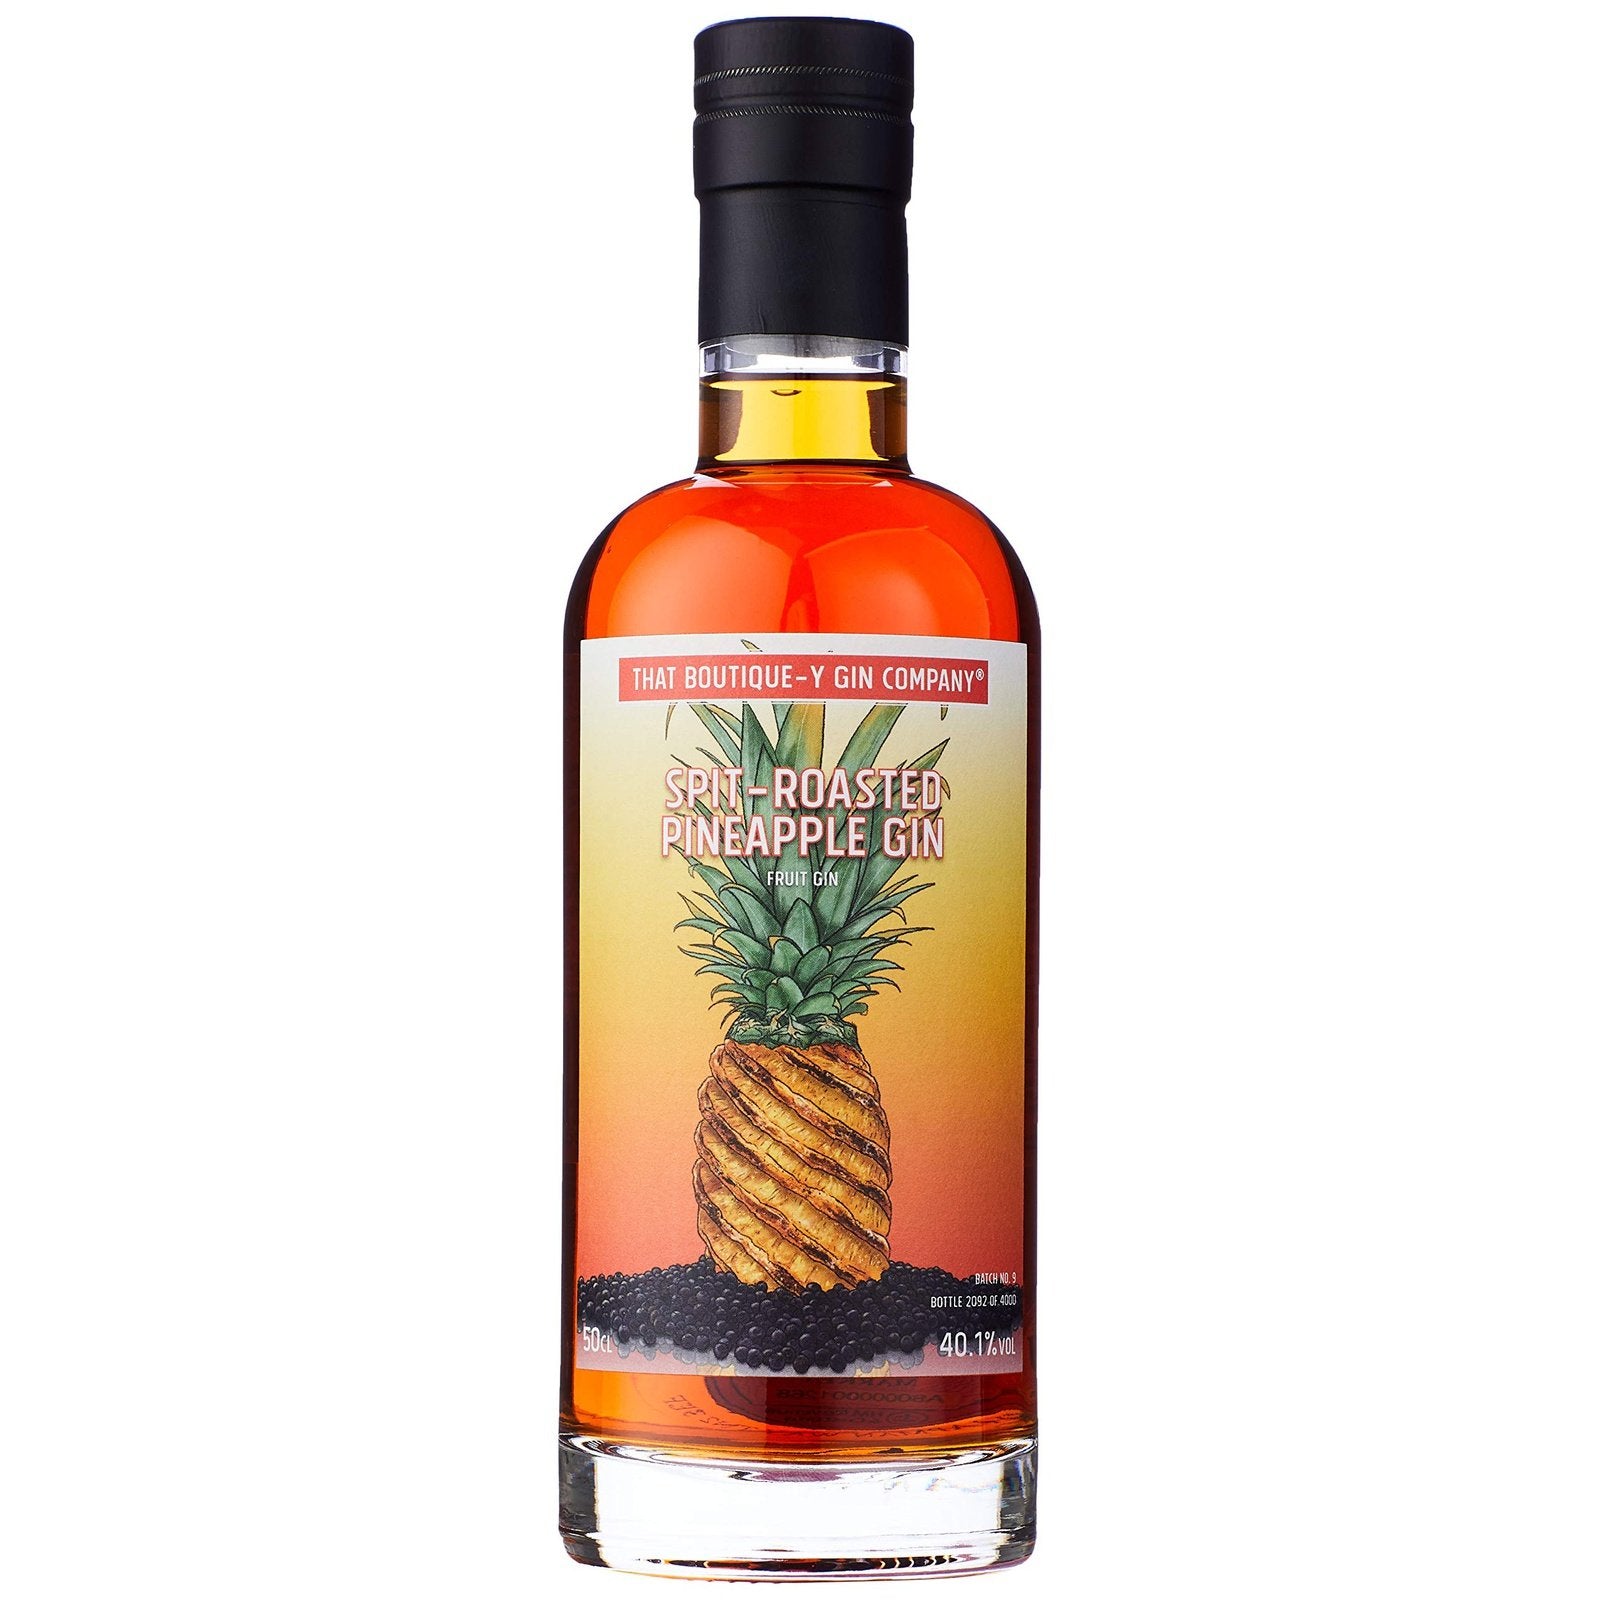 That Boutique-y Gin Company Spit-Roasted Pineapple Gin - The General Wine Company